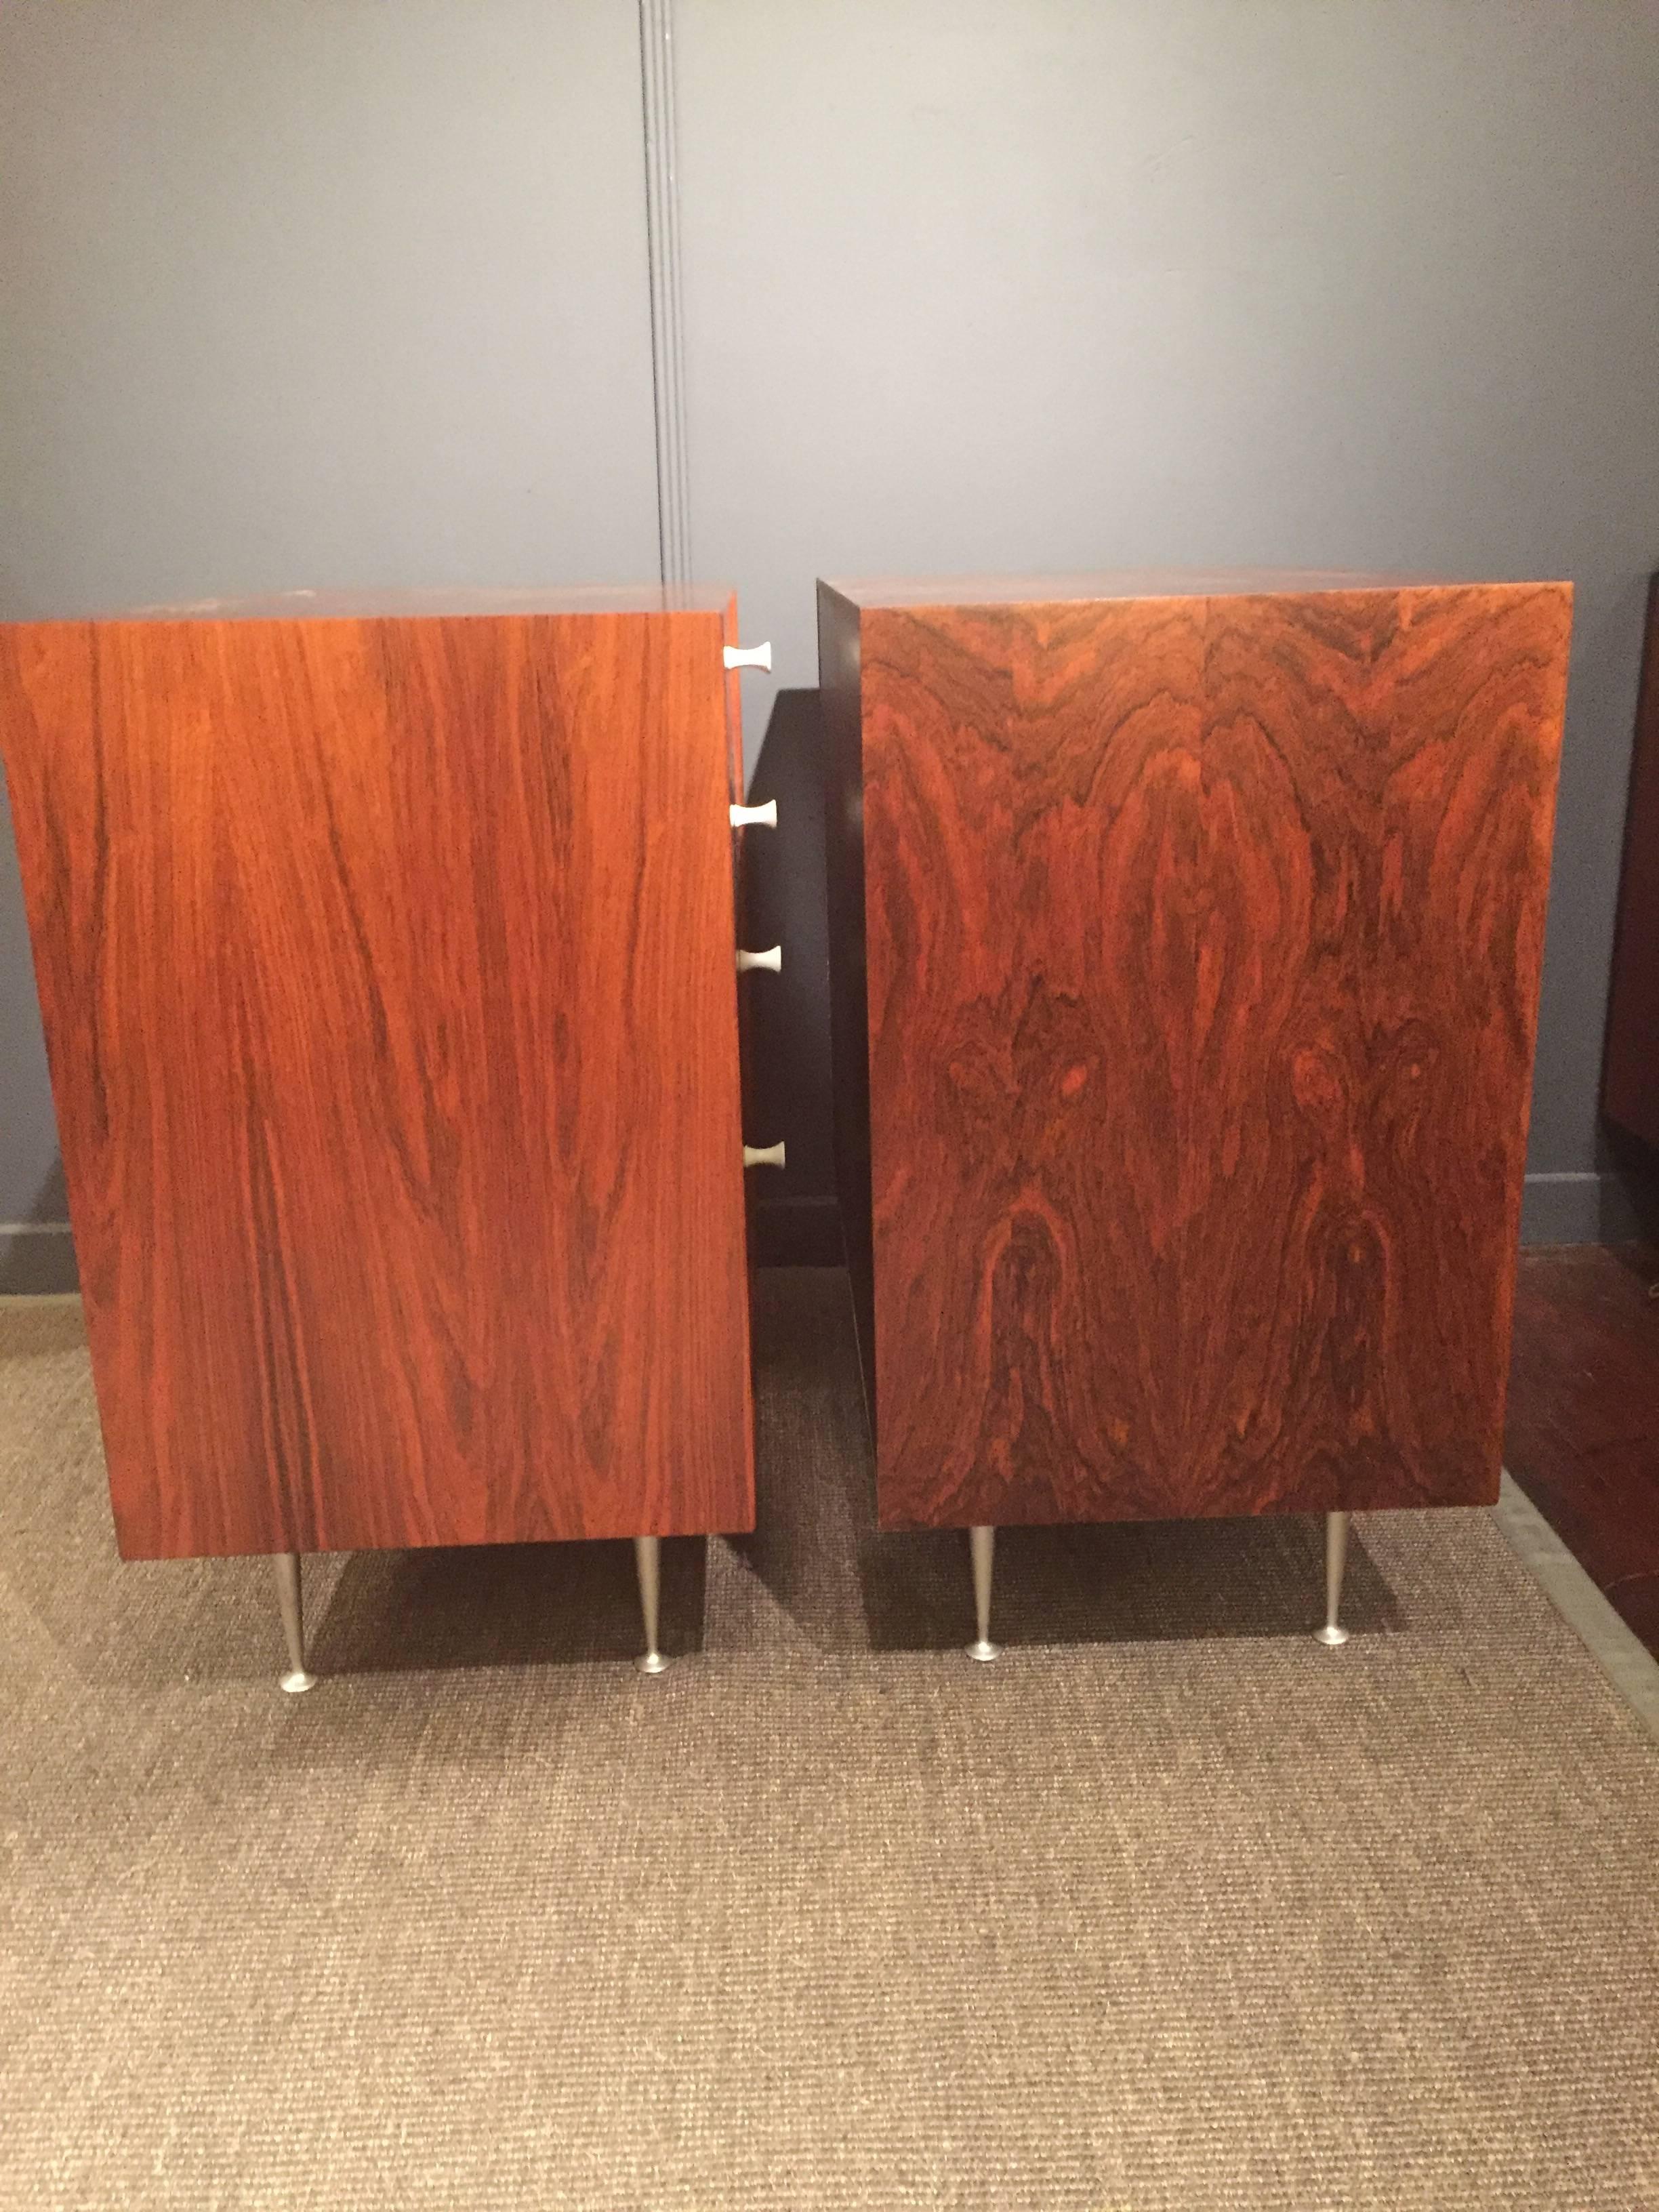 Original matched pair of chests designed by George Nelson for Herman Miller. Perfectly refinished rosewood in dramatic grains with fitted interiors, labeled.